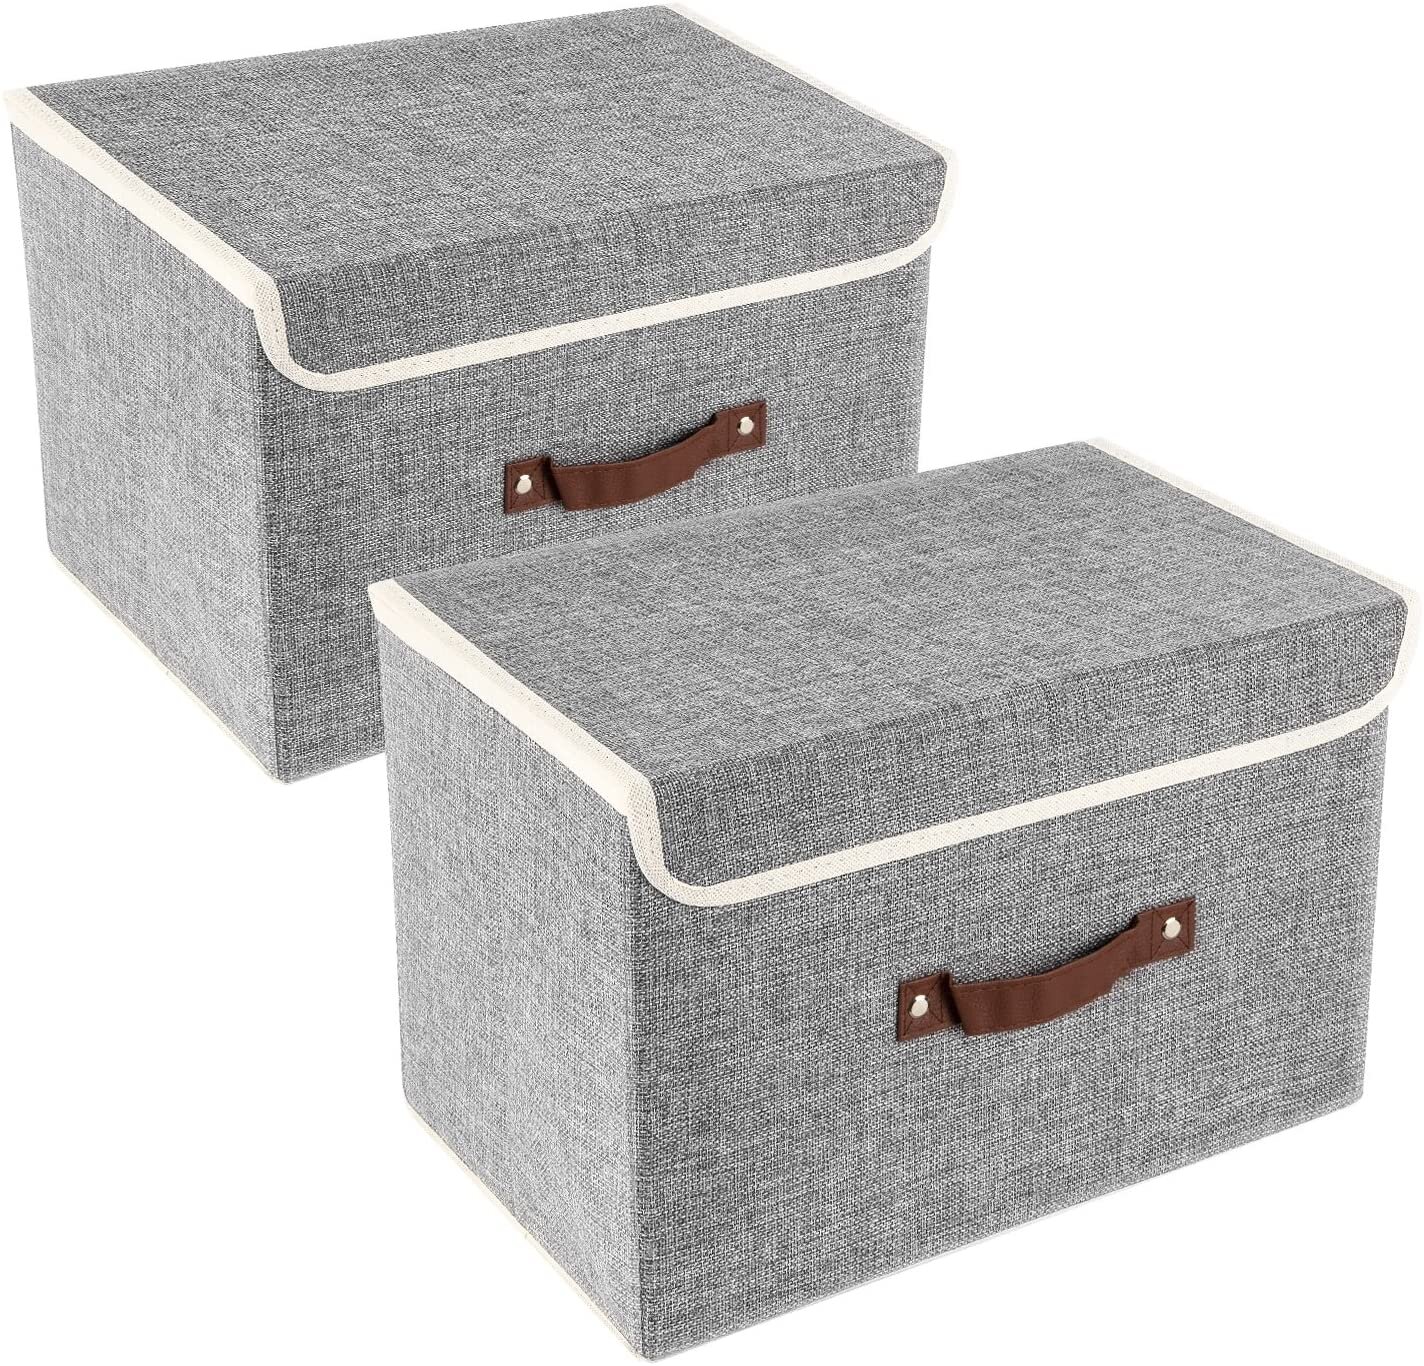 Fabric Storage boxes on Amazon-Click here